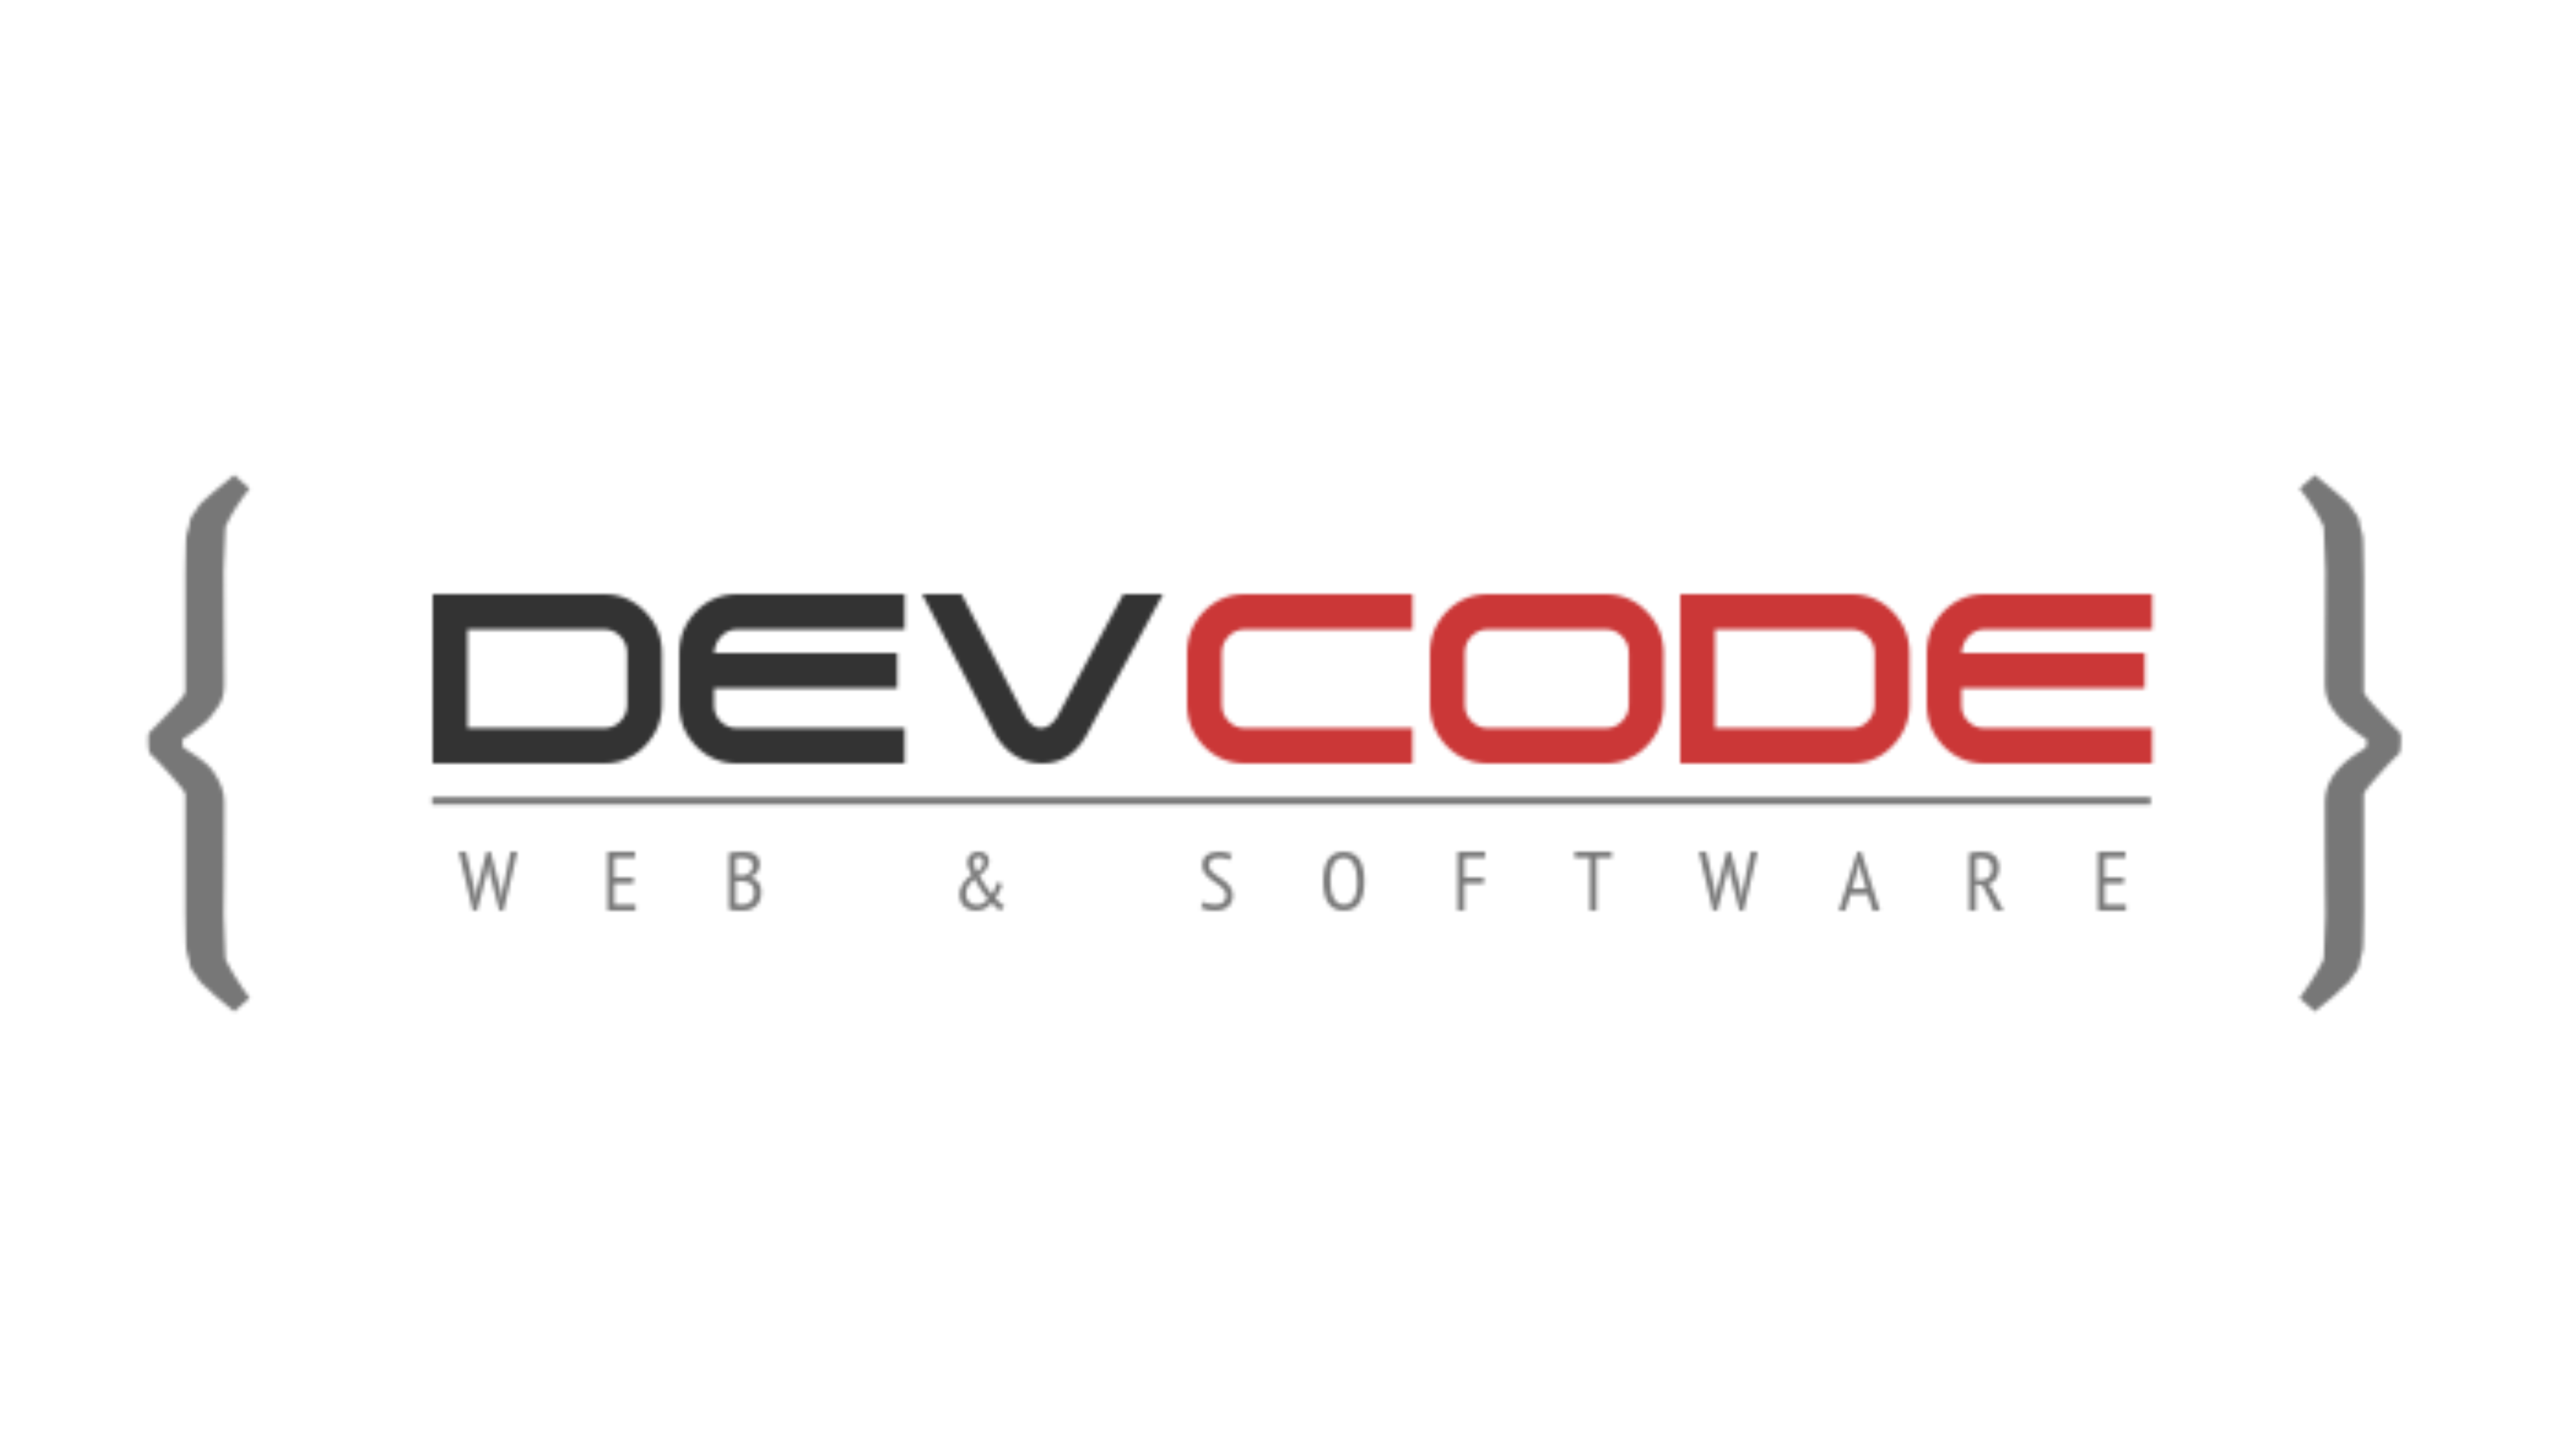 Android Apps by DevCode s.r.l. on Google Play